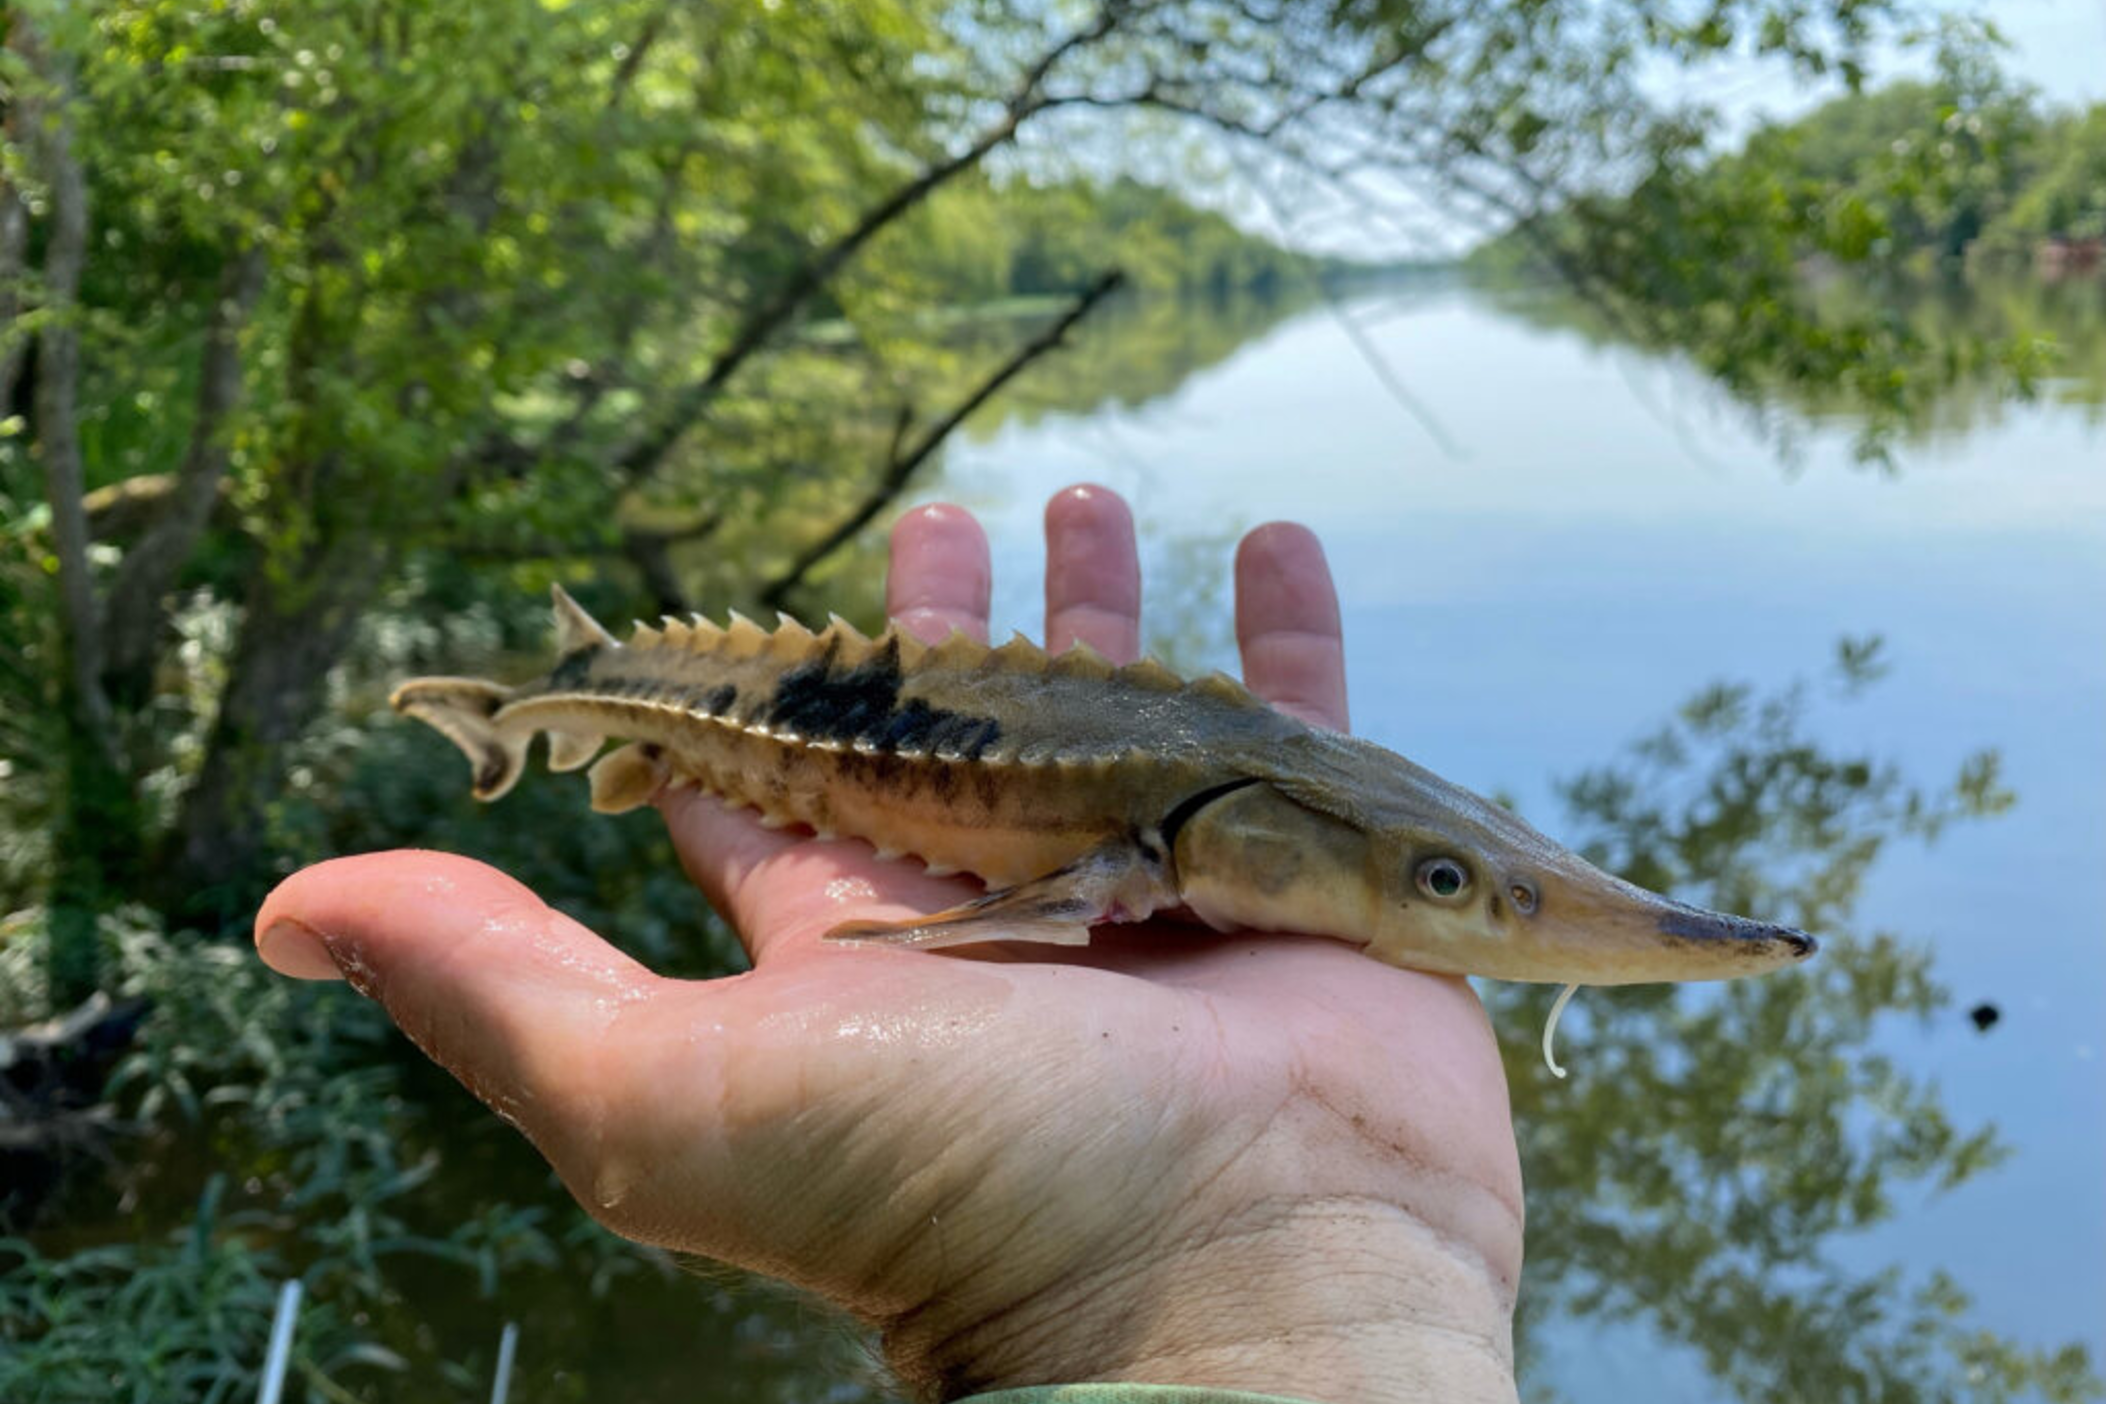 A juvenile lake sturgeon collected in the Coosa River